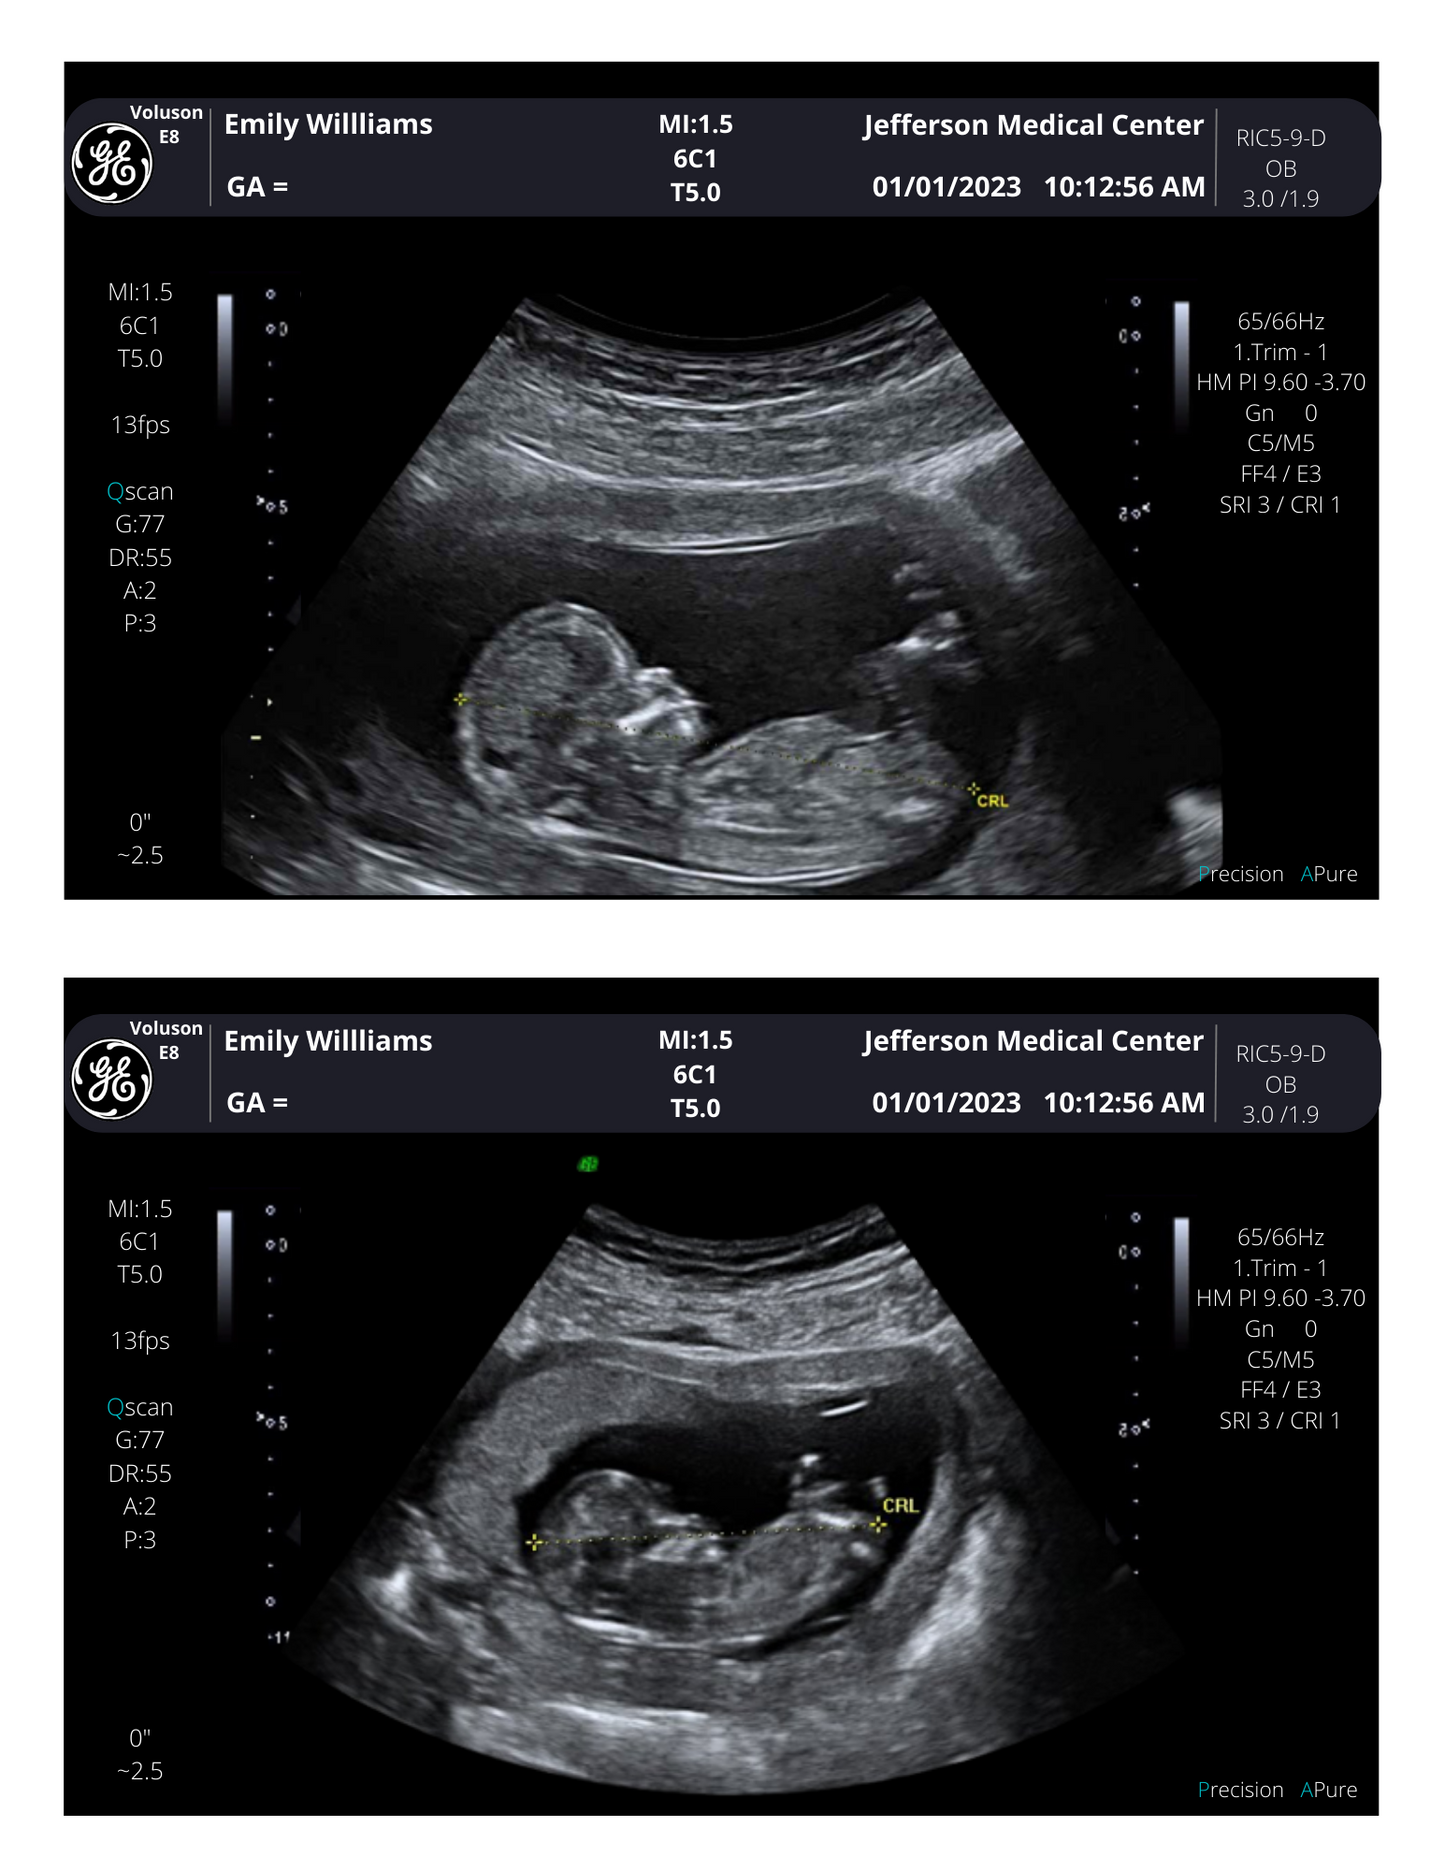 Personalized Fake Ultrasound Picture | PRINTED & SHIPPED!!  Customizable Sonogram Picture |